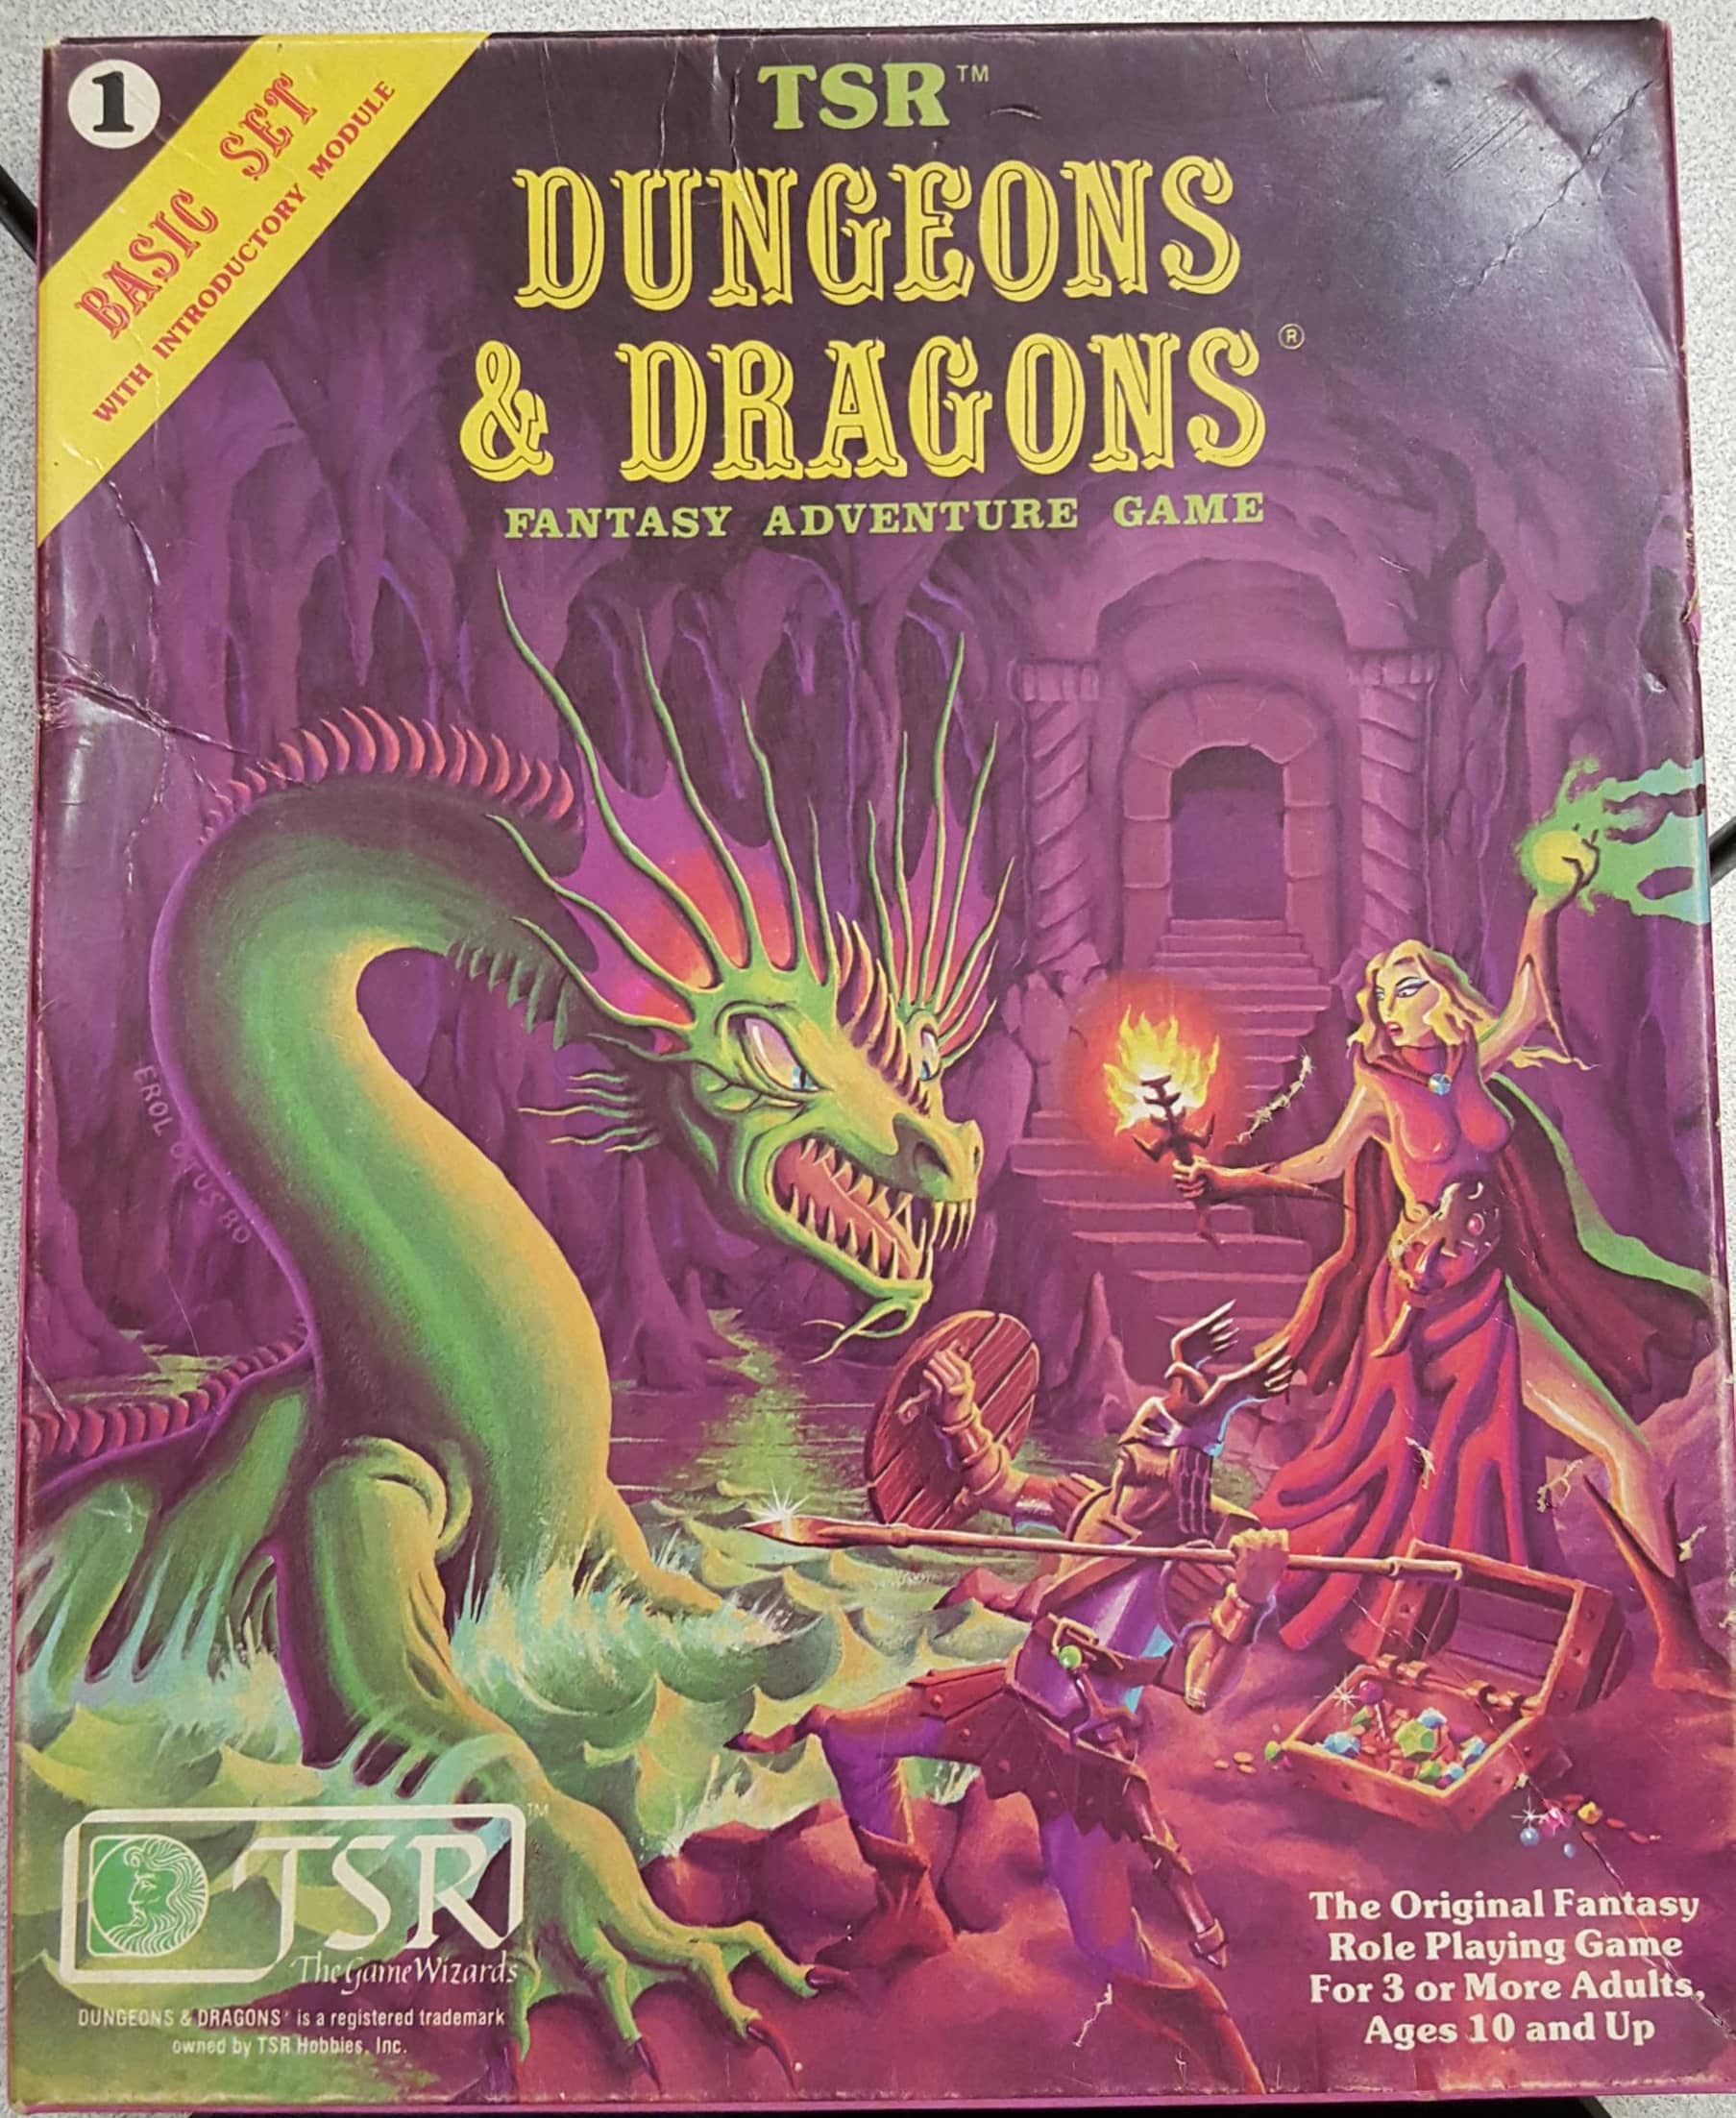 1981 TSR Dungeons & Dragons Basic Rules 1 Fantasy Adventure Game Rulebook 1st P for sale online 